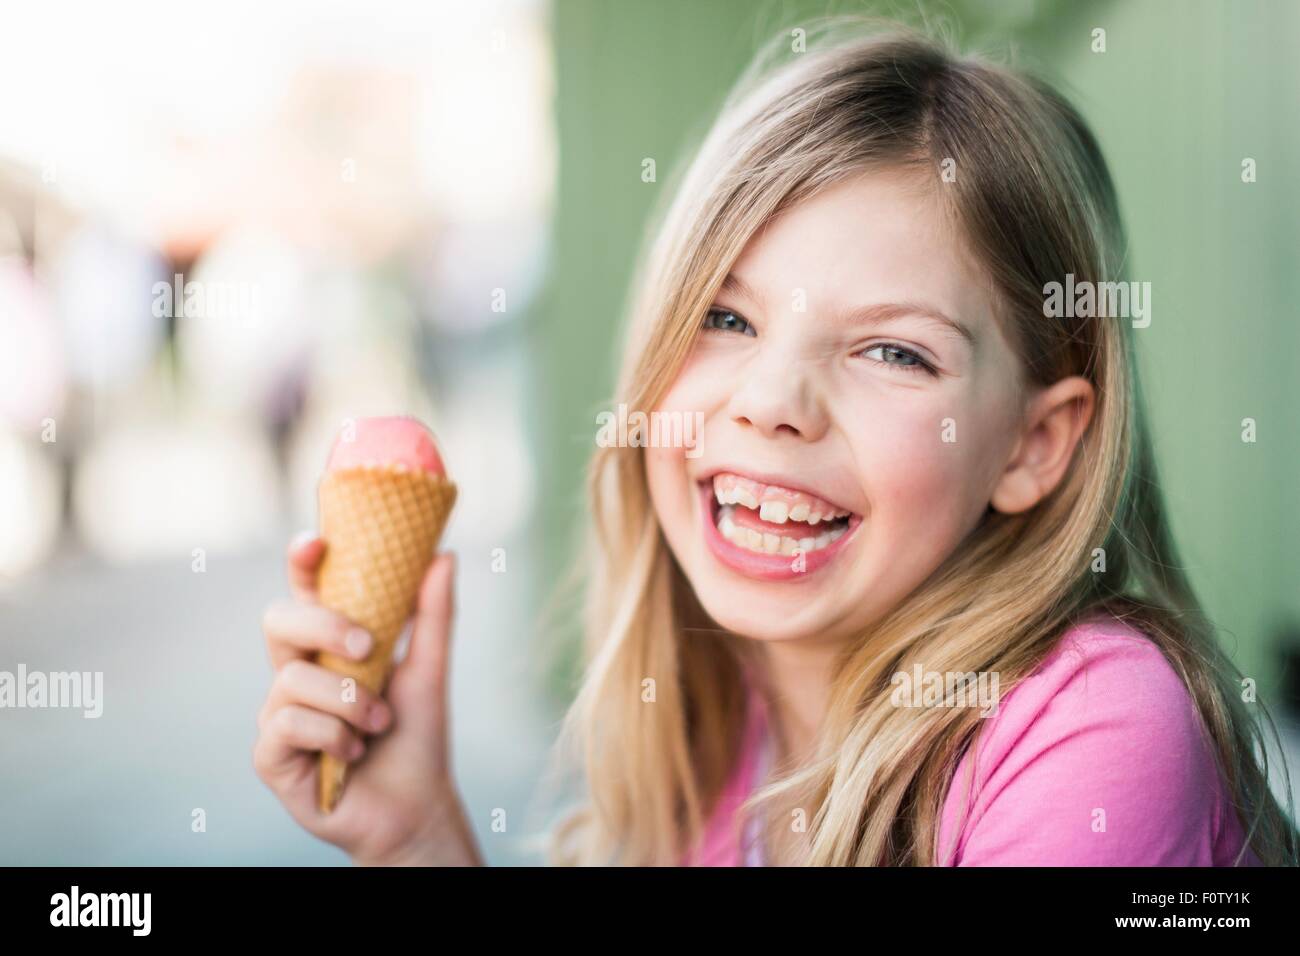 Portrait of young girl eating icecream Banque D'Images